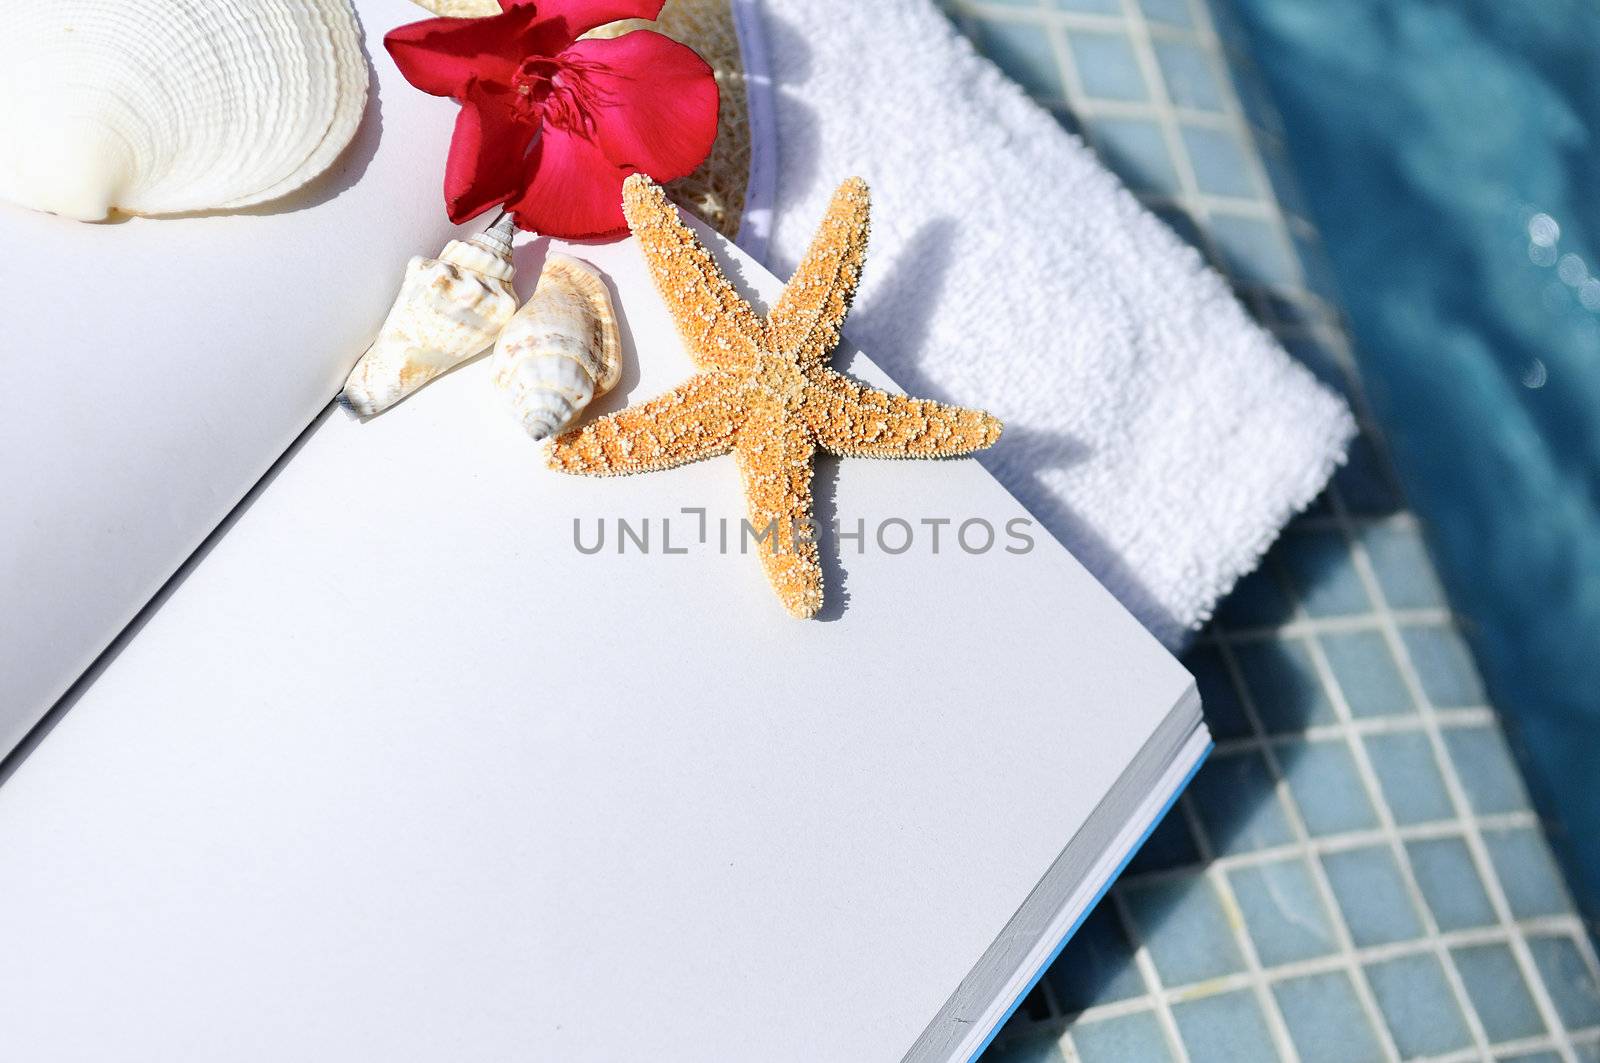 open book, shellfish and white towel beside a pool